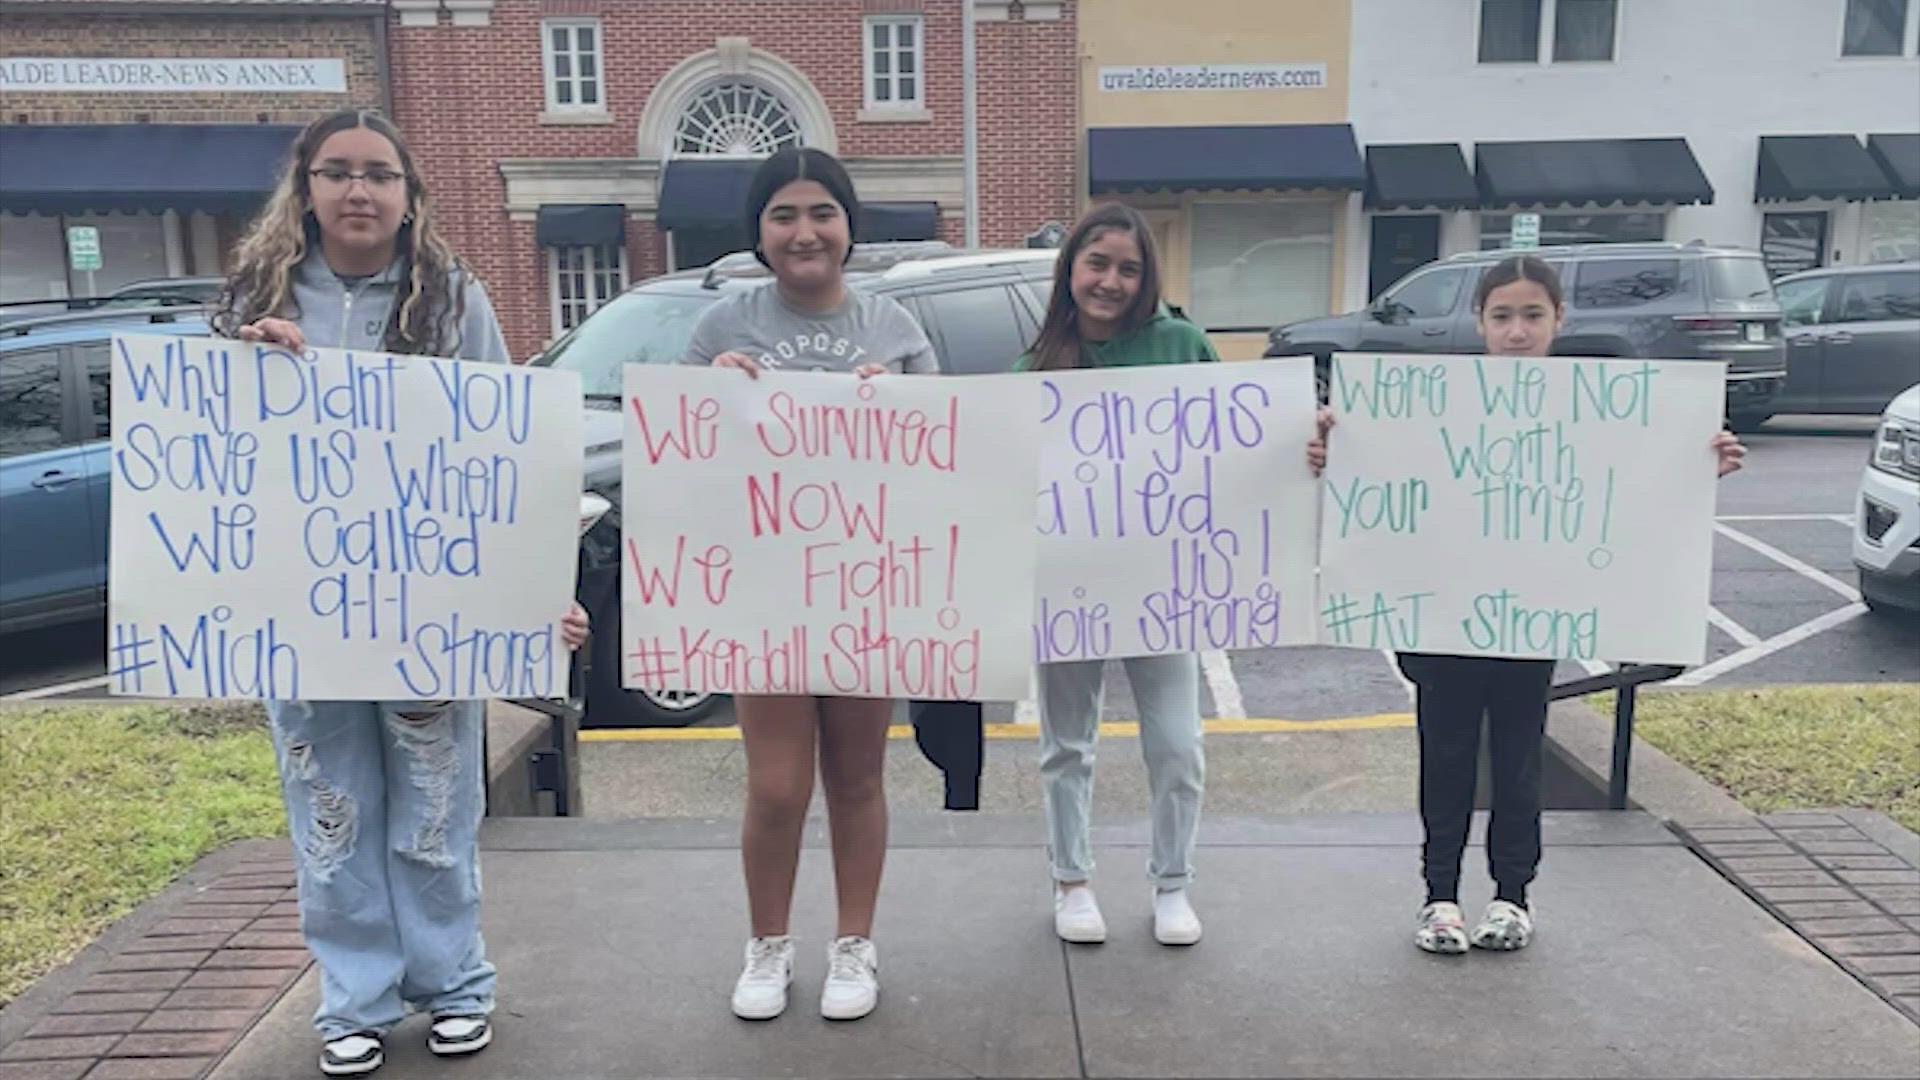 Powerful images have surfaced of four survivors holding up posters demanding the resignation of the law enforcement officers who failed to protect them.